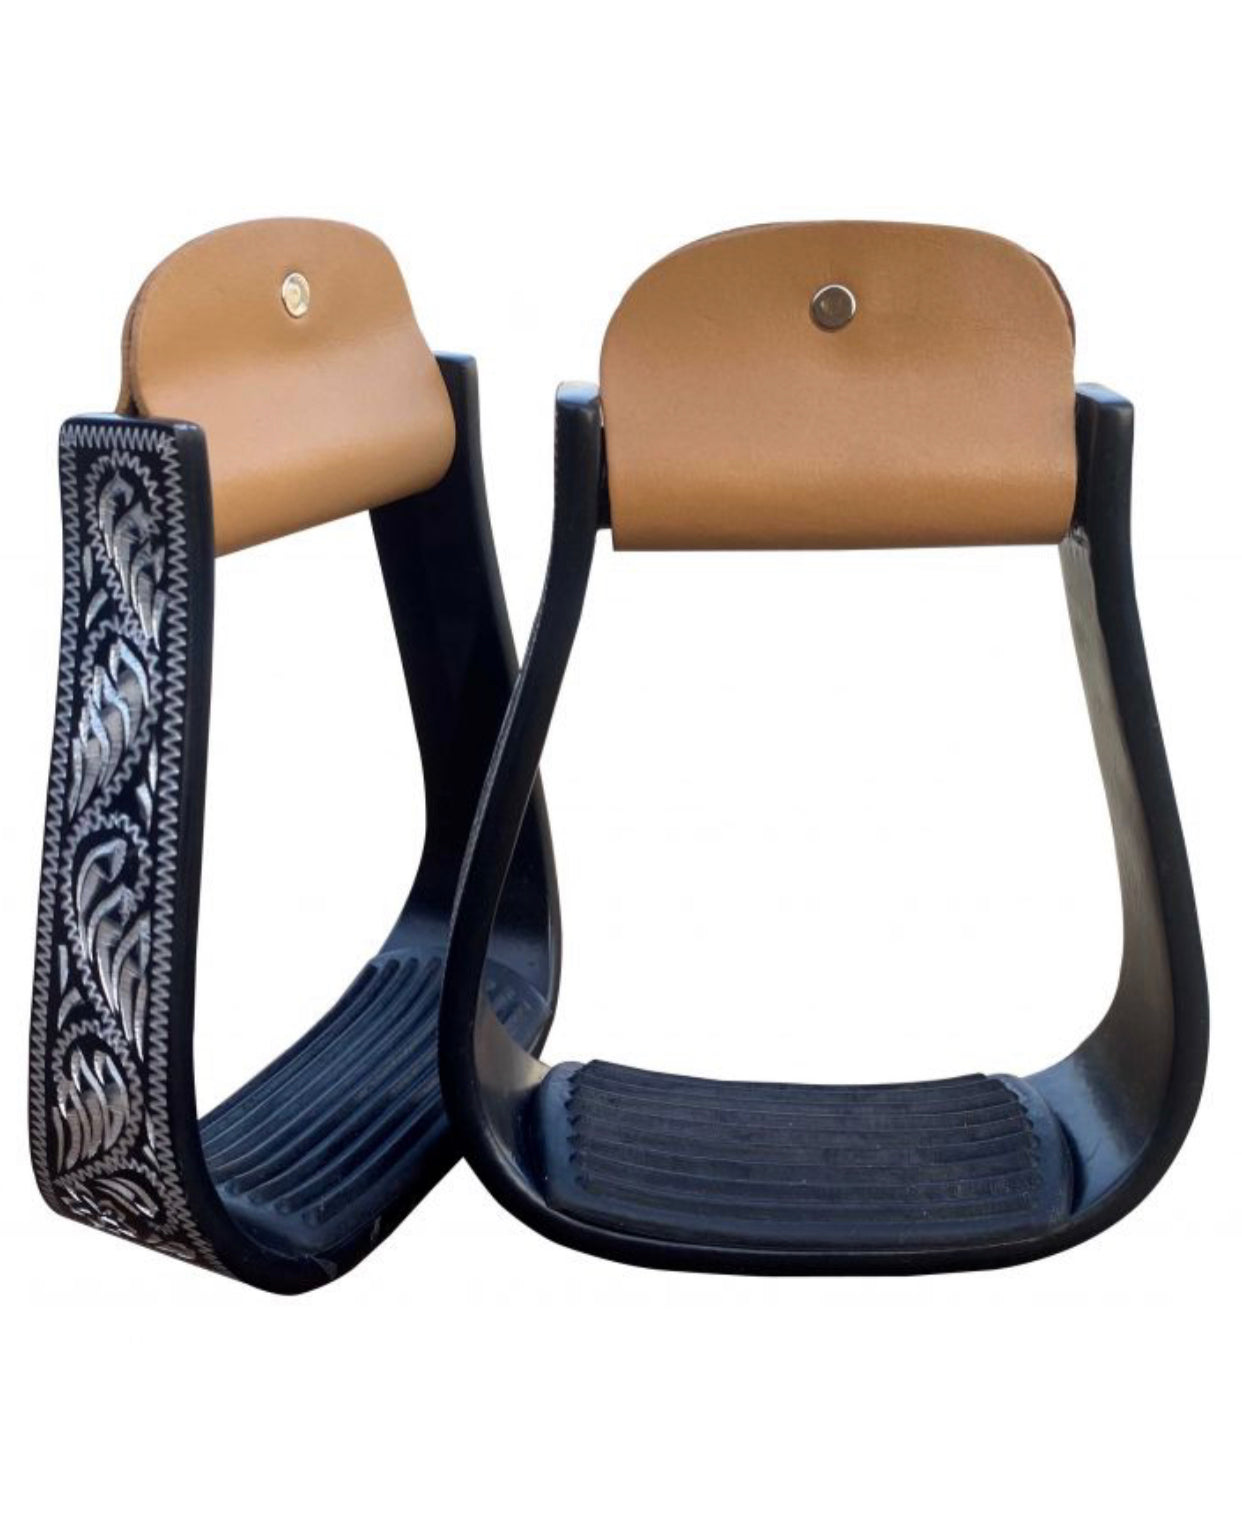 20226 - Black Aluminum Stirrups with Silver Engravings